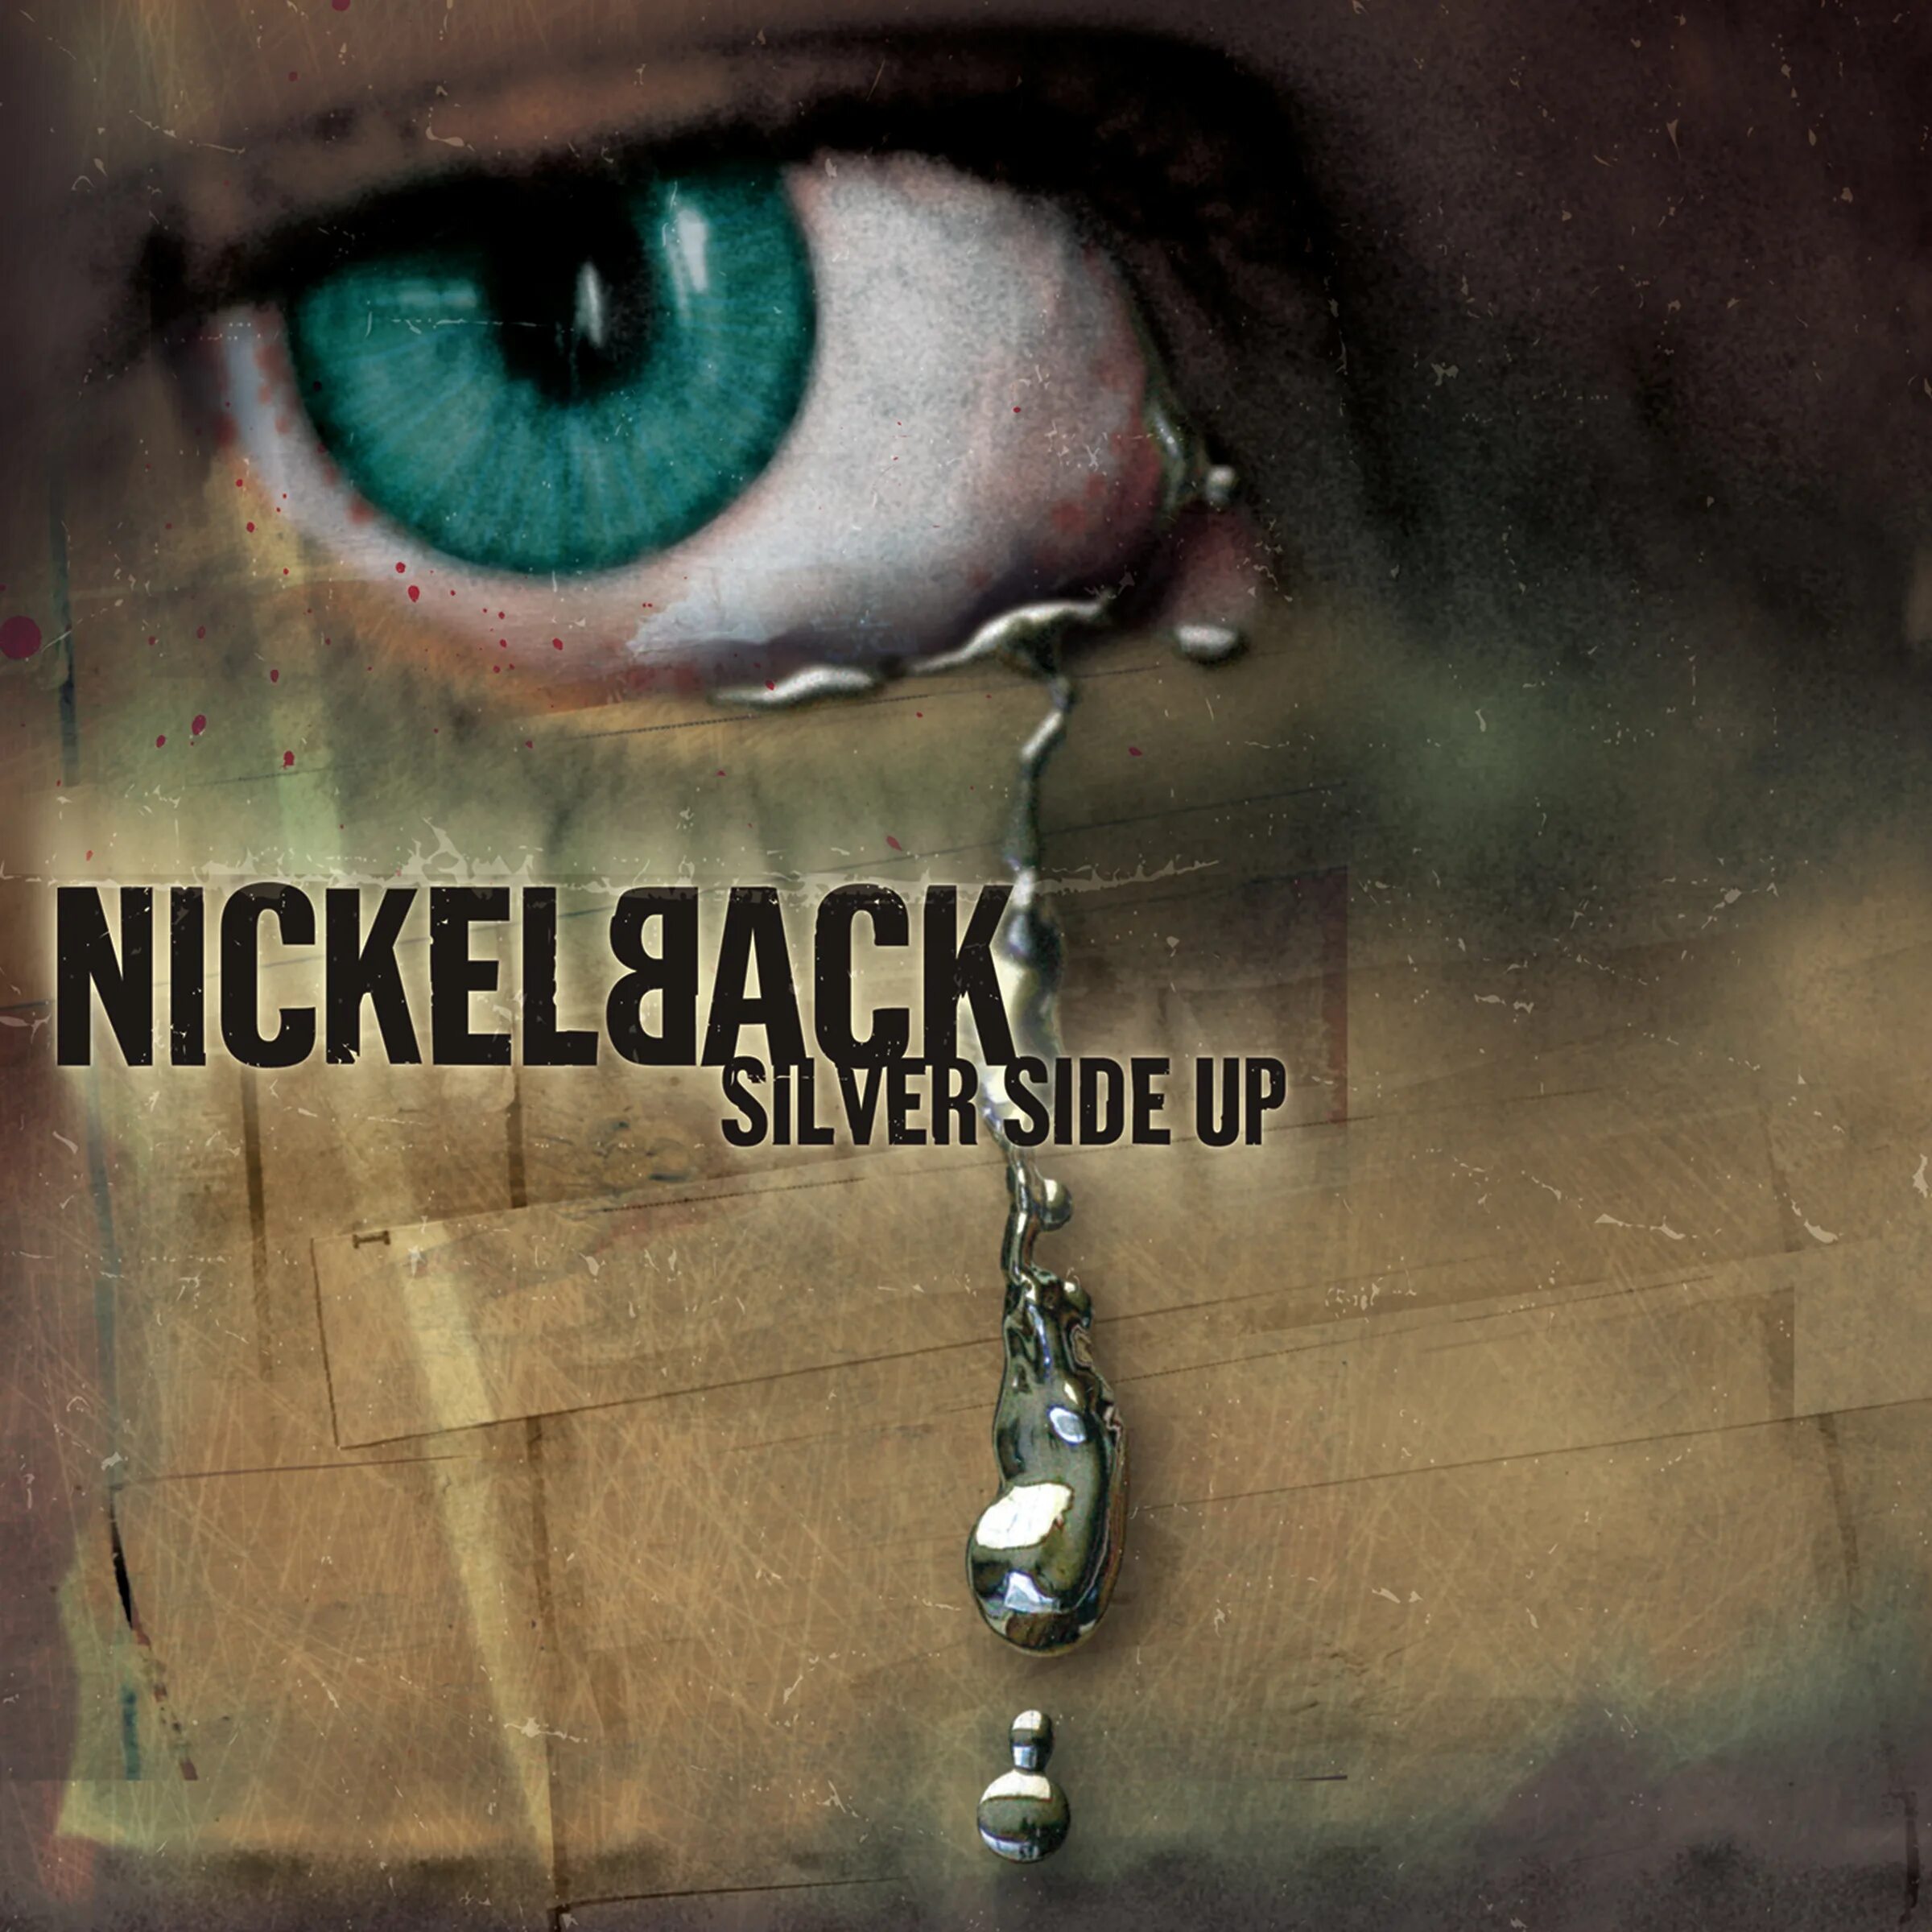 Nickelback "Silver Side up". 2001 - Silver Side up. Nickelback Silver Side up 2001. Nickelback Silver Side up обложка. Side me up